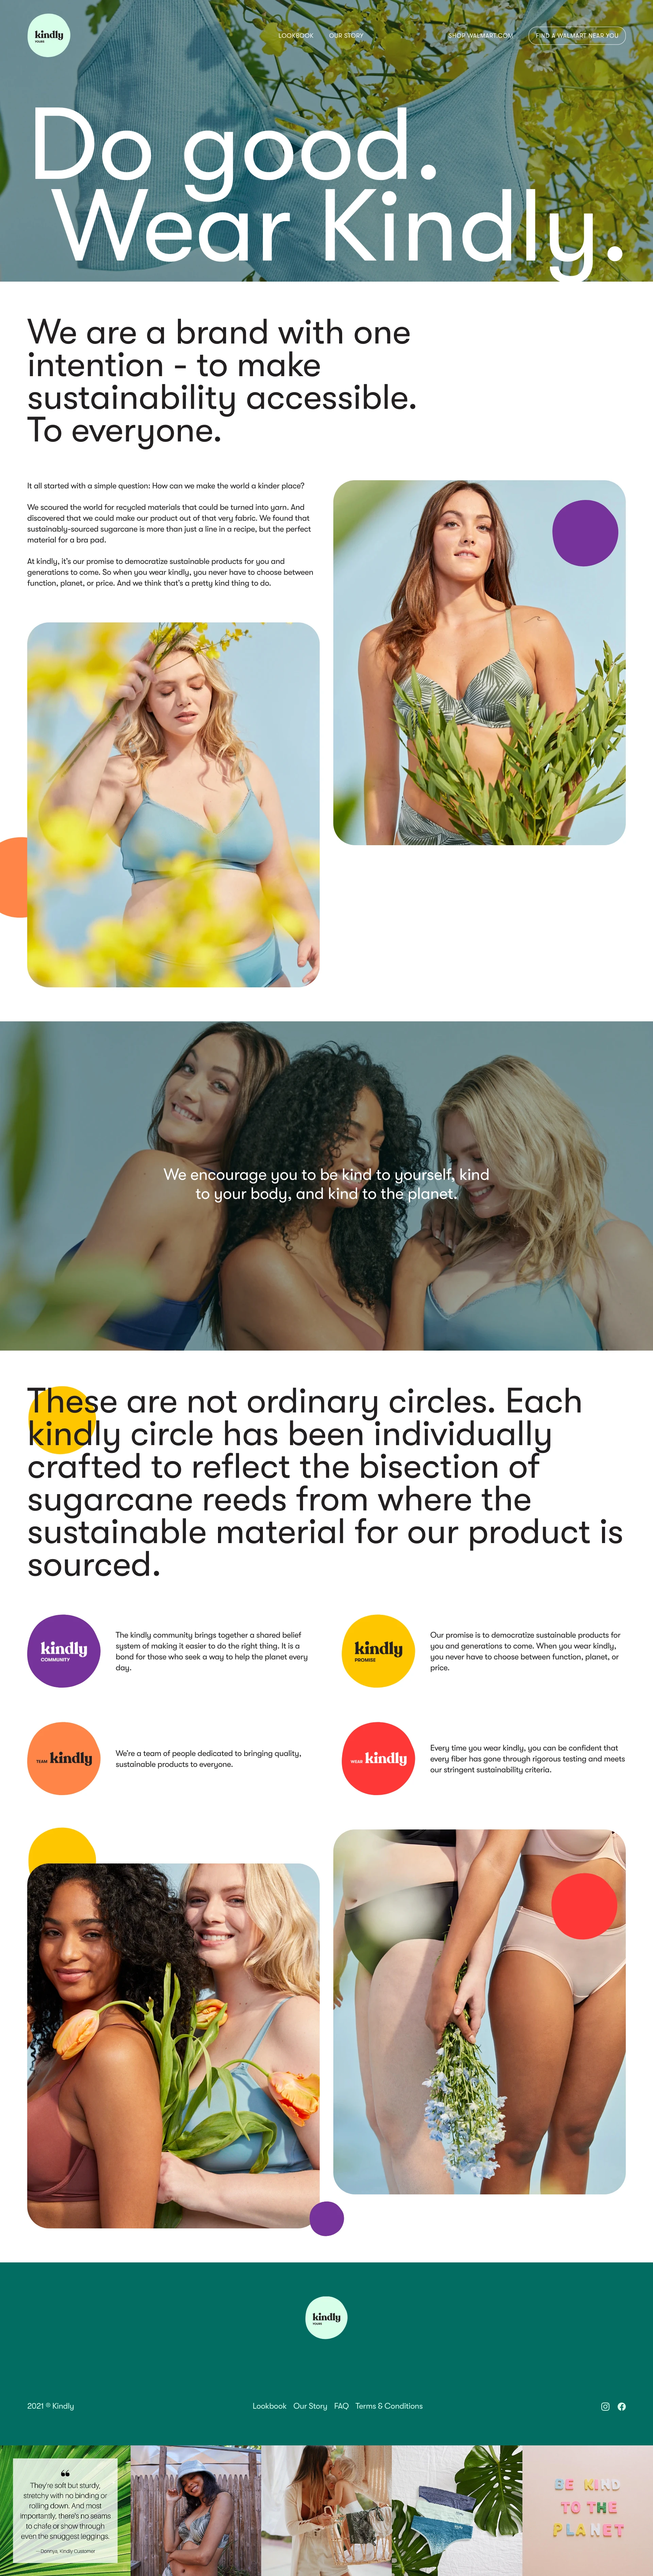 Kindly Landing Page Example: We’re on a mission to make the world a kinder place by designing products that are kind to your body, kind to your wallet, and kind to the planet.